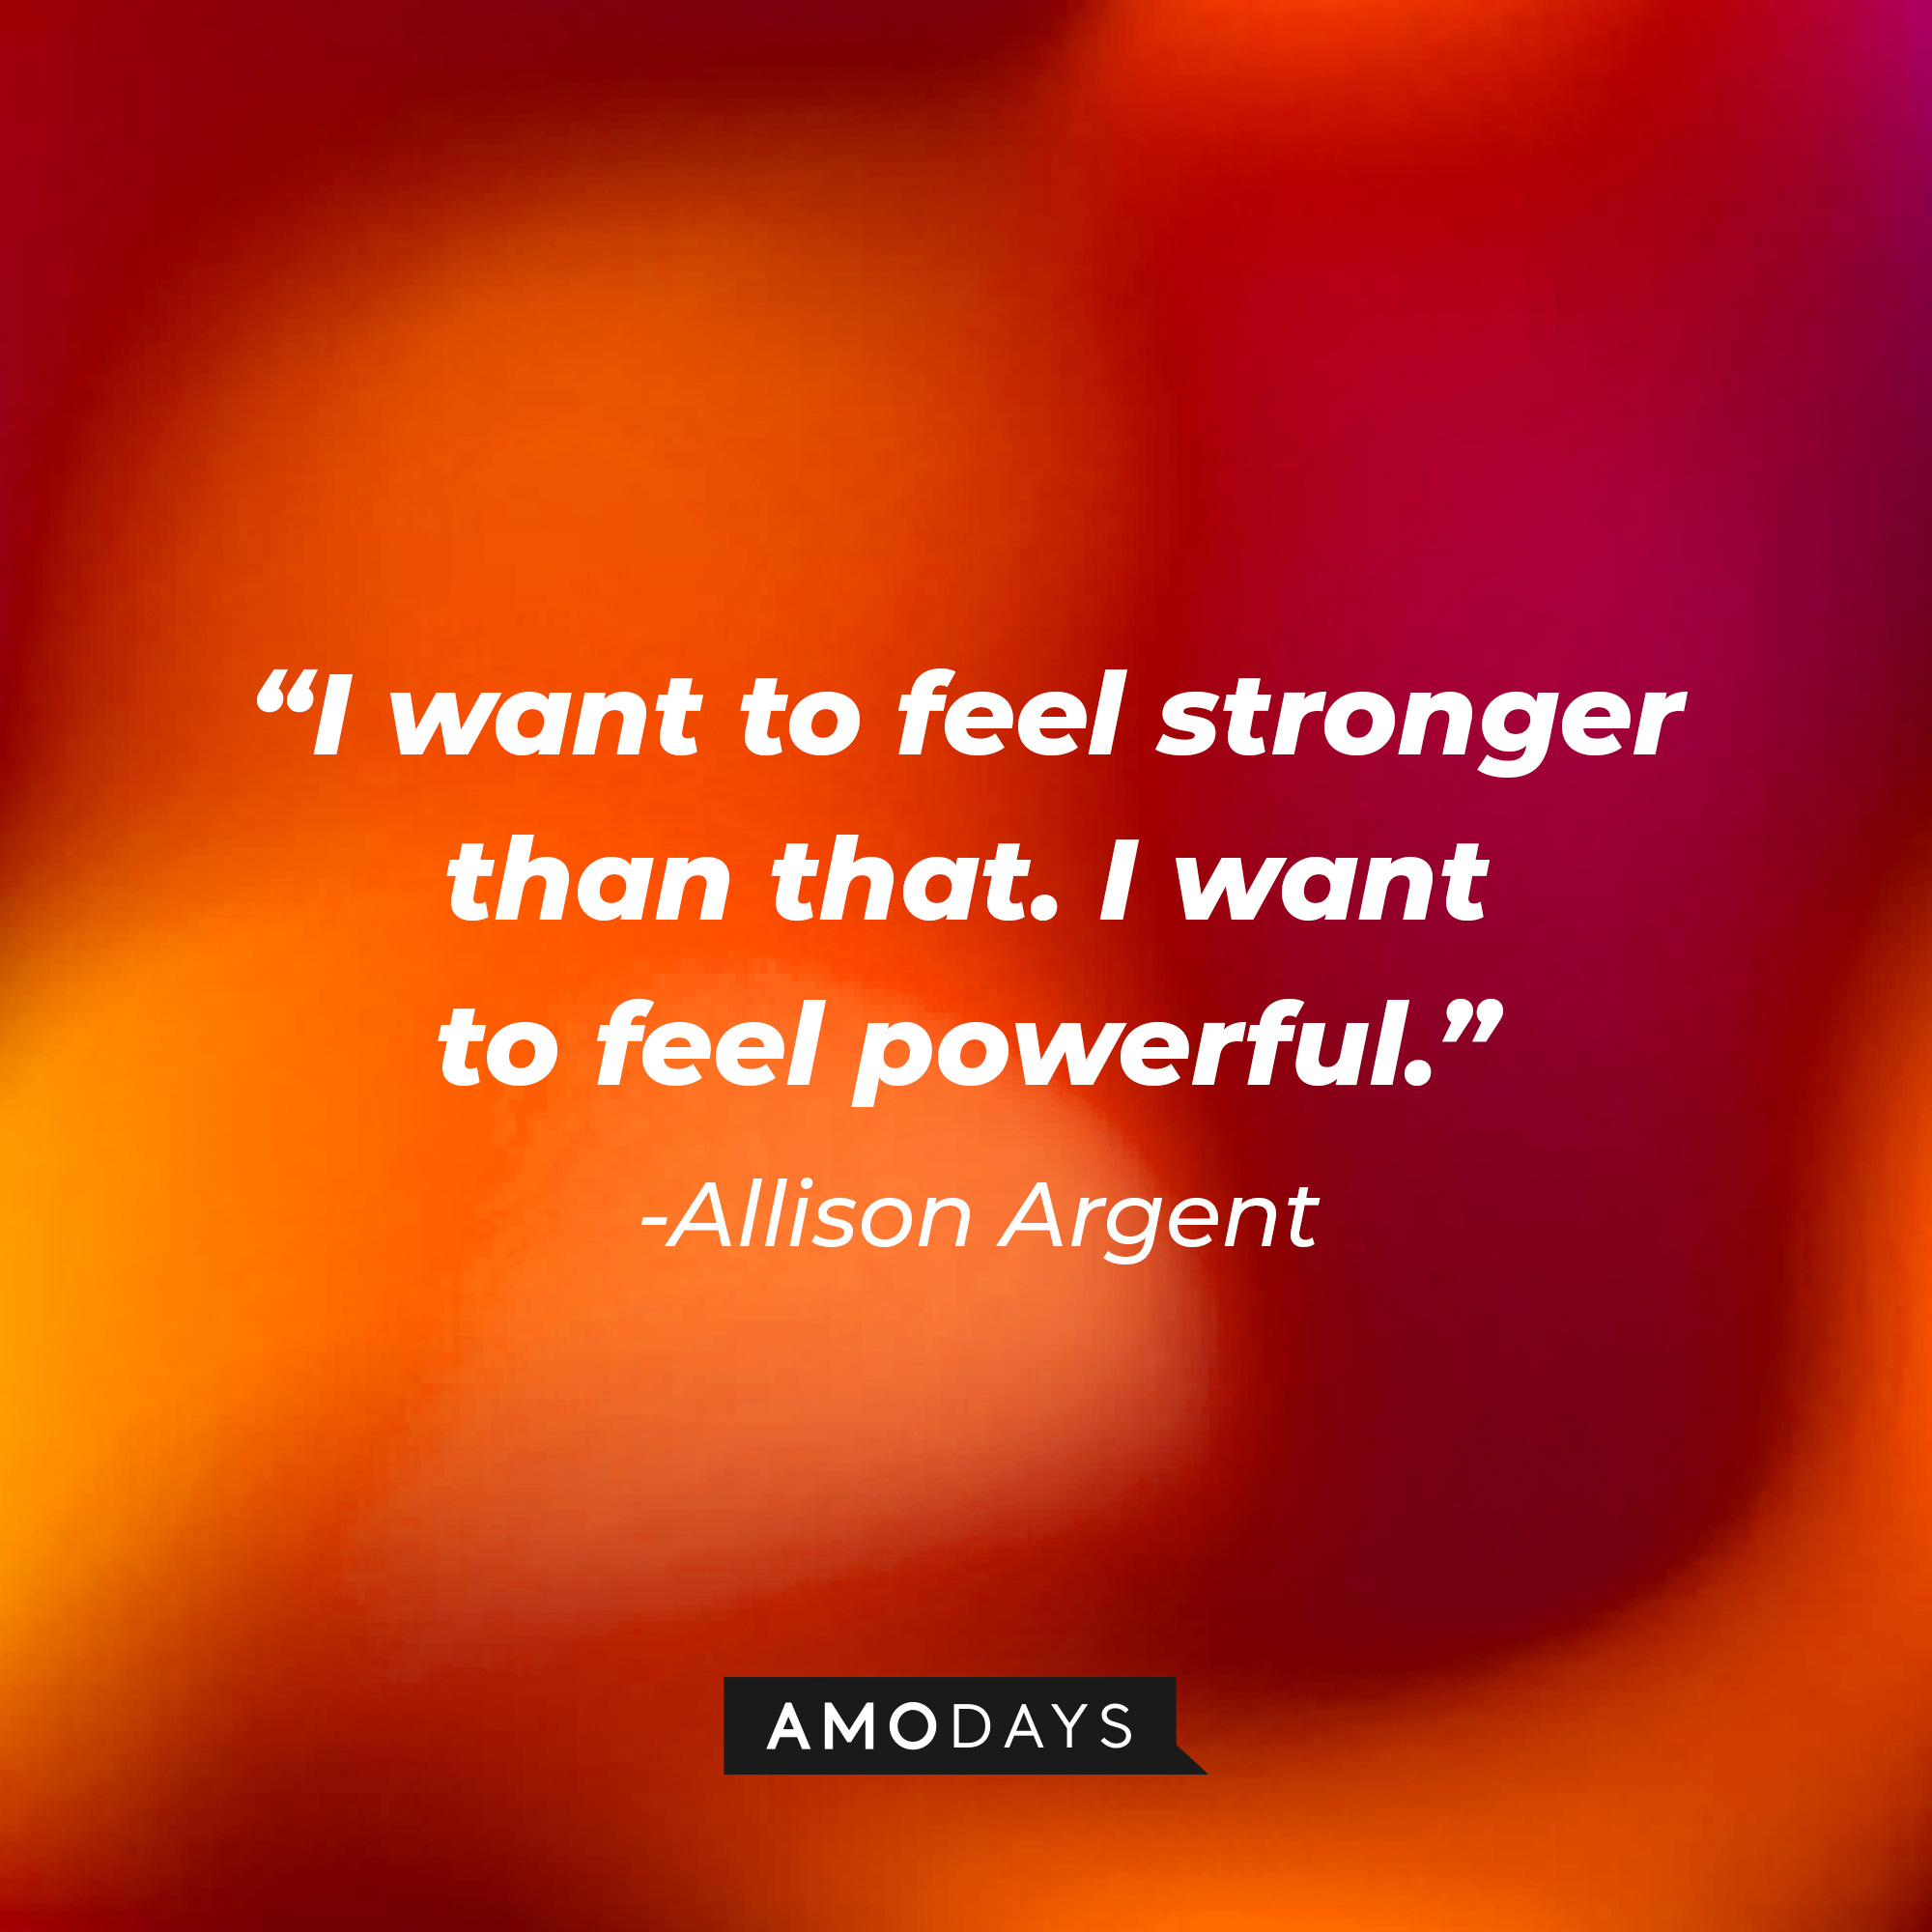 Allison Argen's quote: "I want to feel stronger than that. I want to feel powerful." | Source: AmoDays